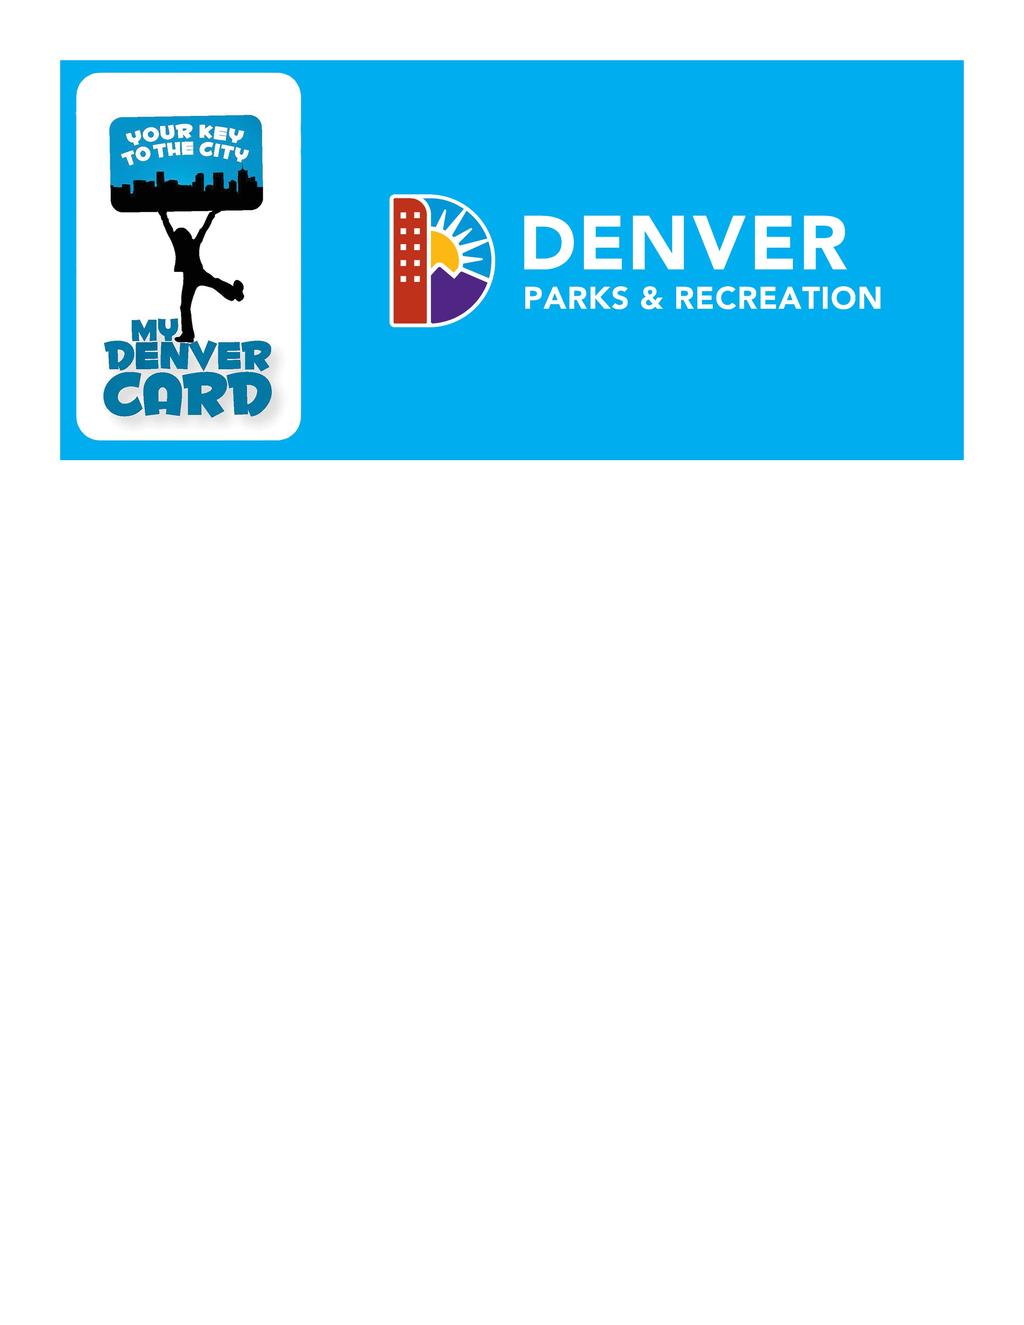 Join us for drop-in MY Denver activities: Monday - Friday 12:00pm - 4:00pm MY Denver Cardholders can access any Denver Recreation Center.